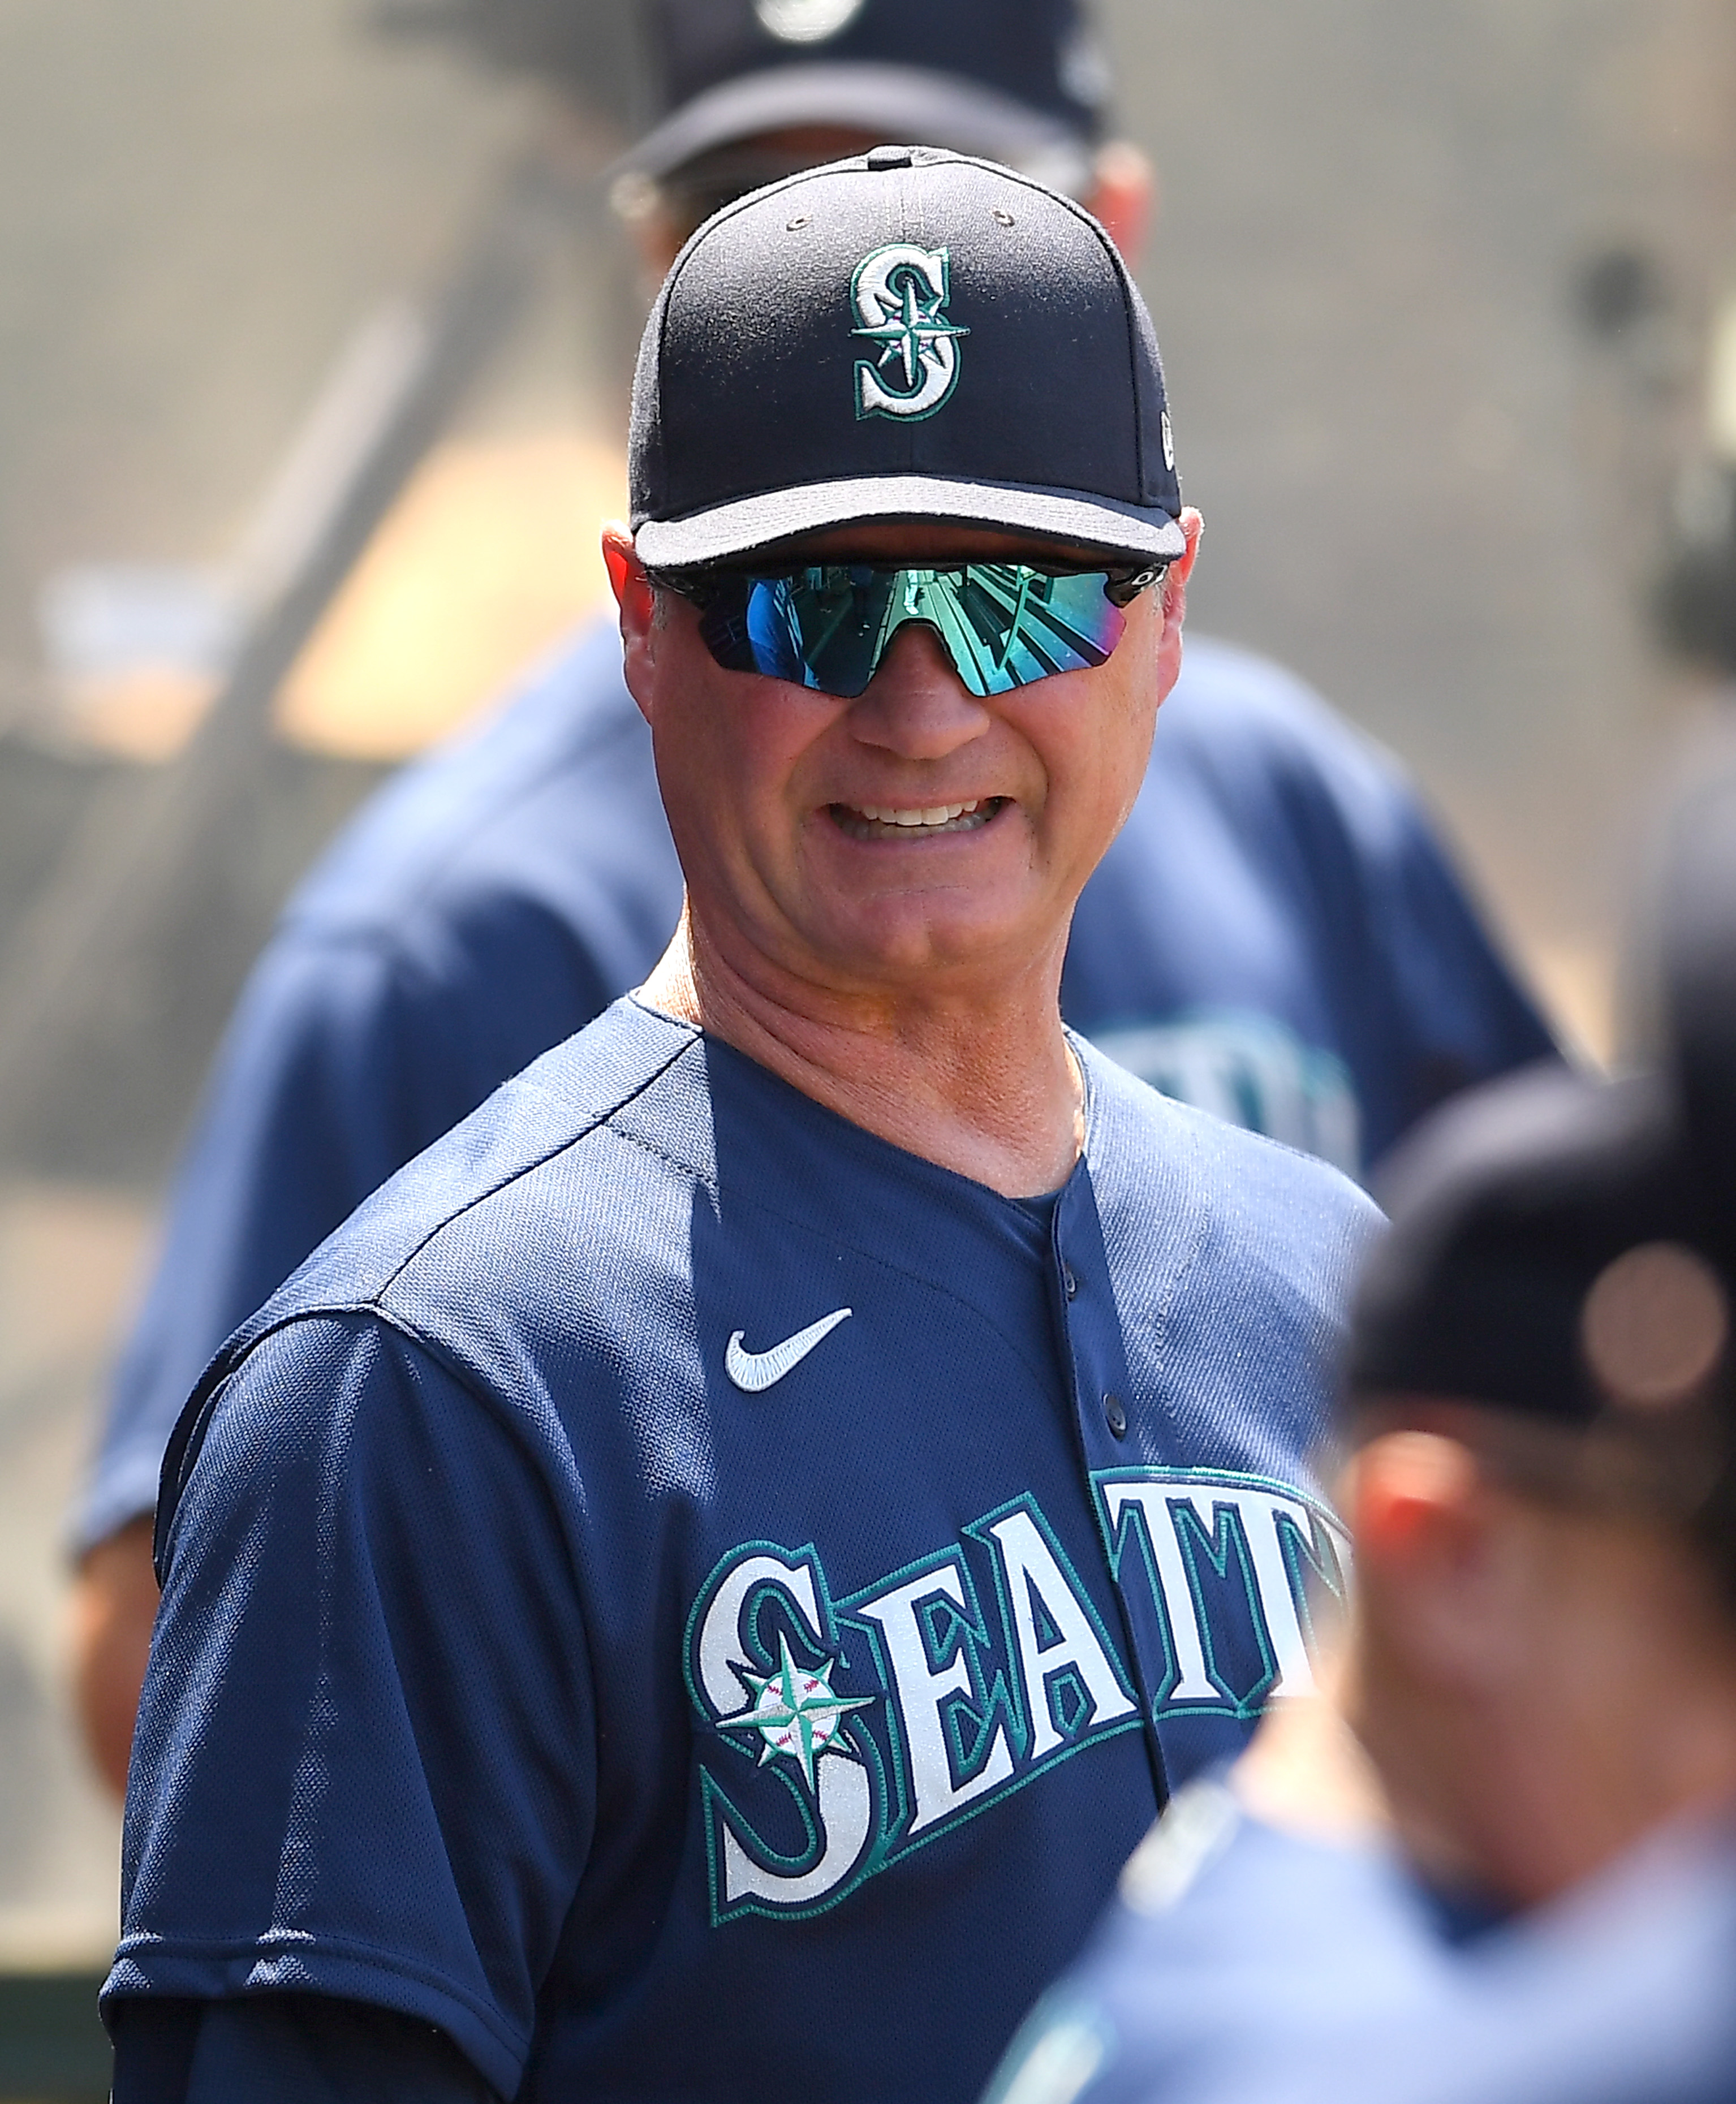 Former Bluejay Scott Servais named Mariners manager